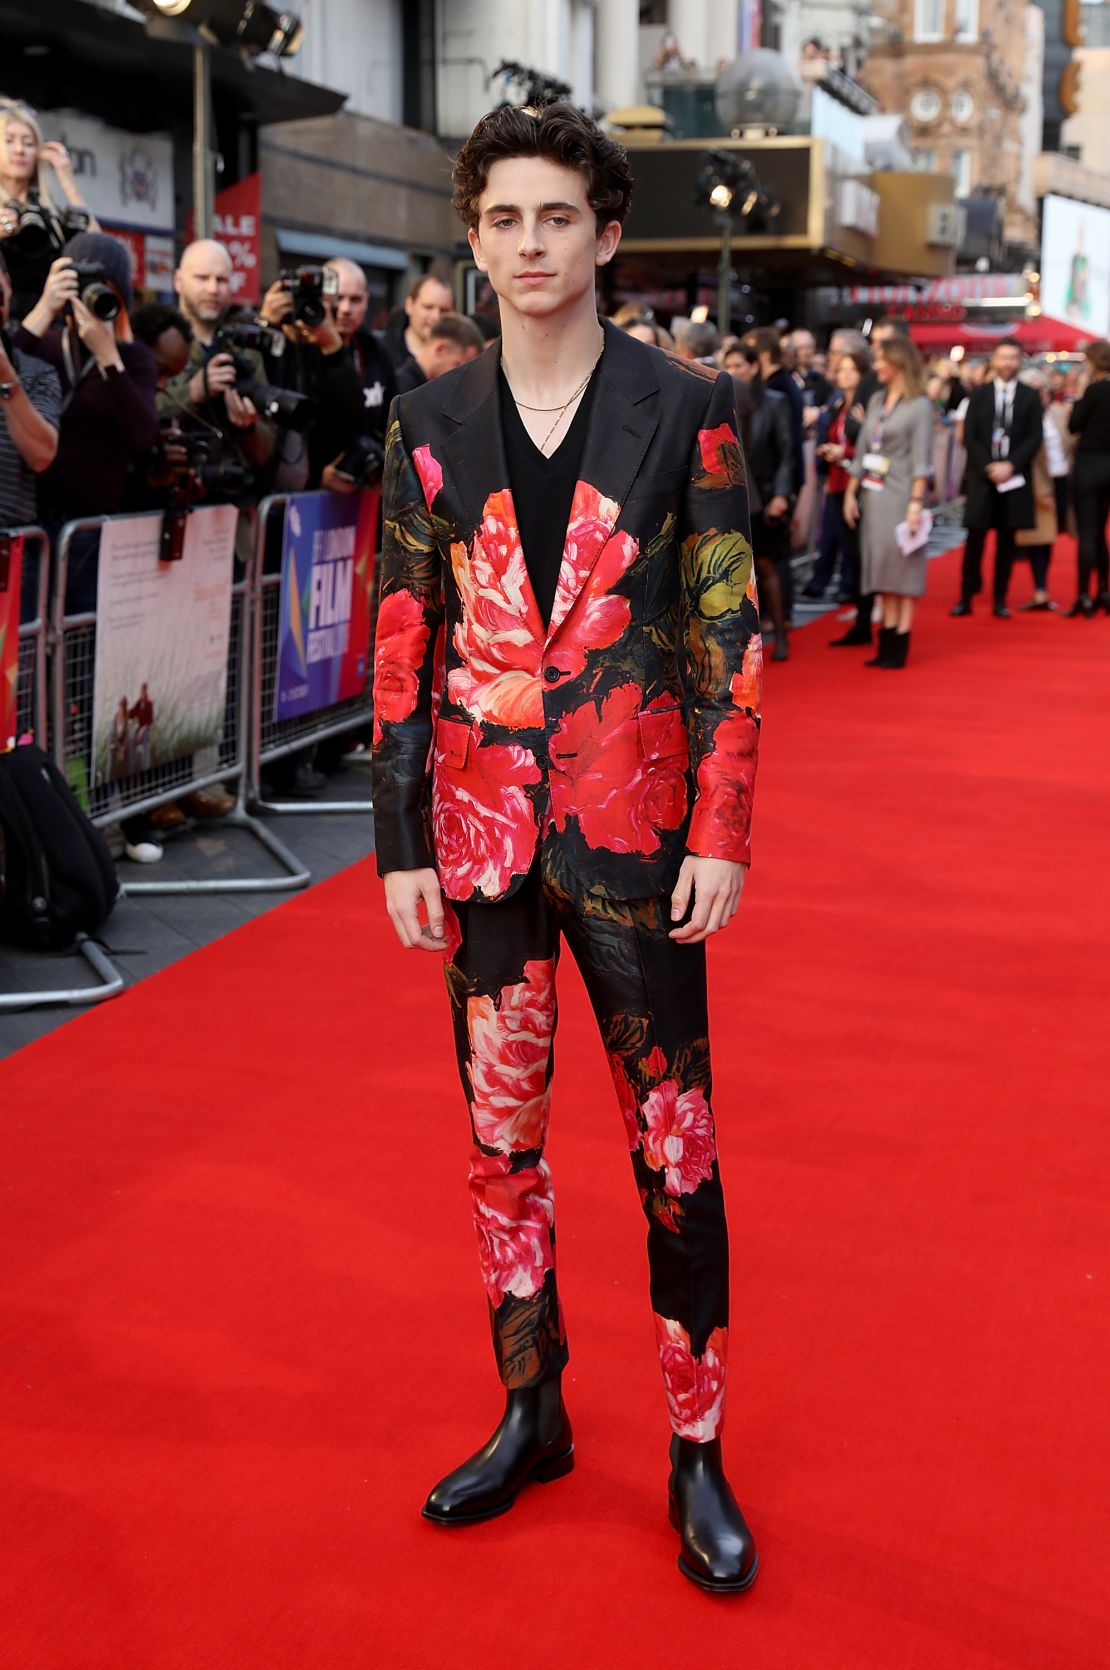 Chalamet turned to designer Alexander McQueen for this floral-print suit, worn to the 2018 London premiere of "Beautiful Boy."